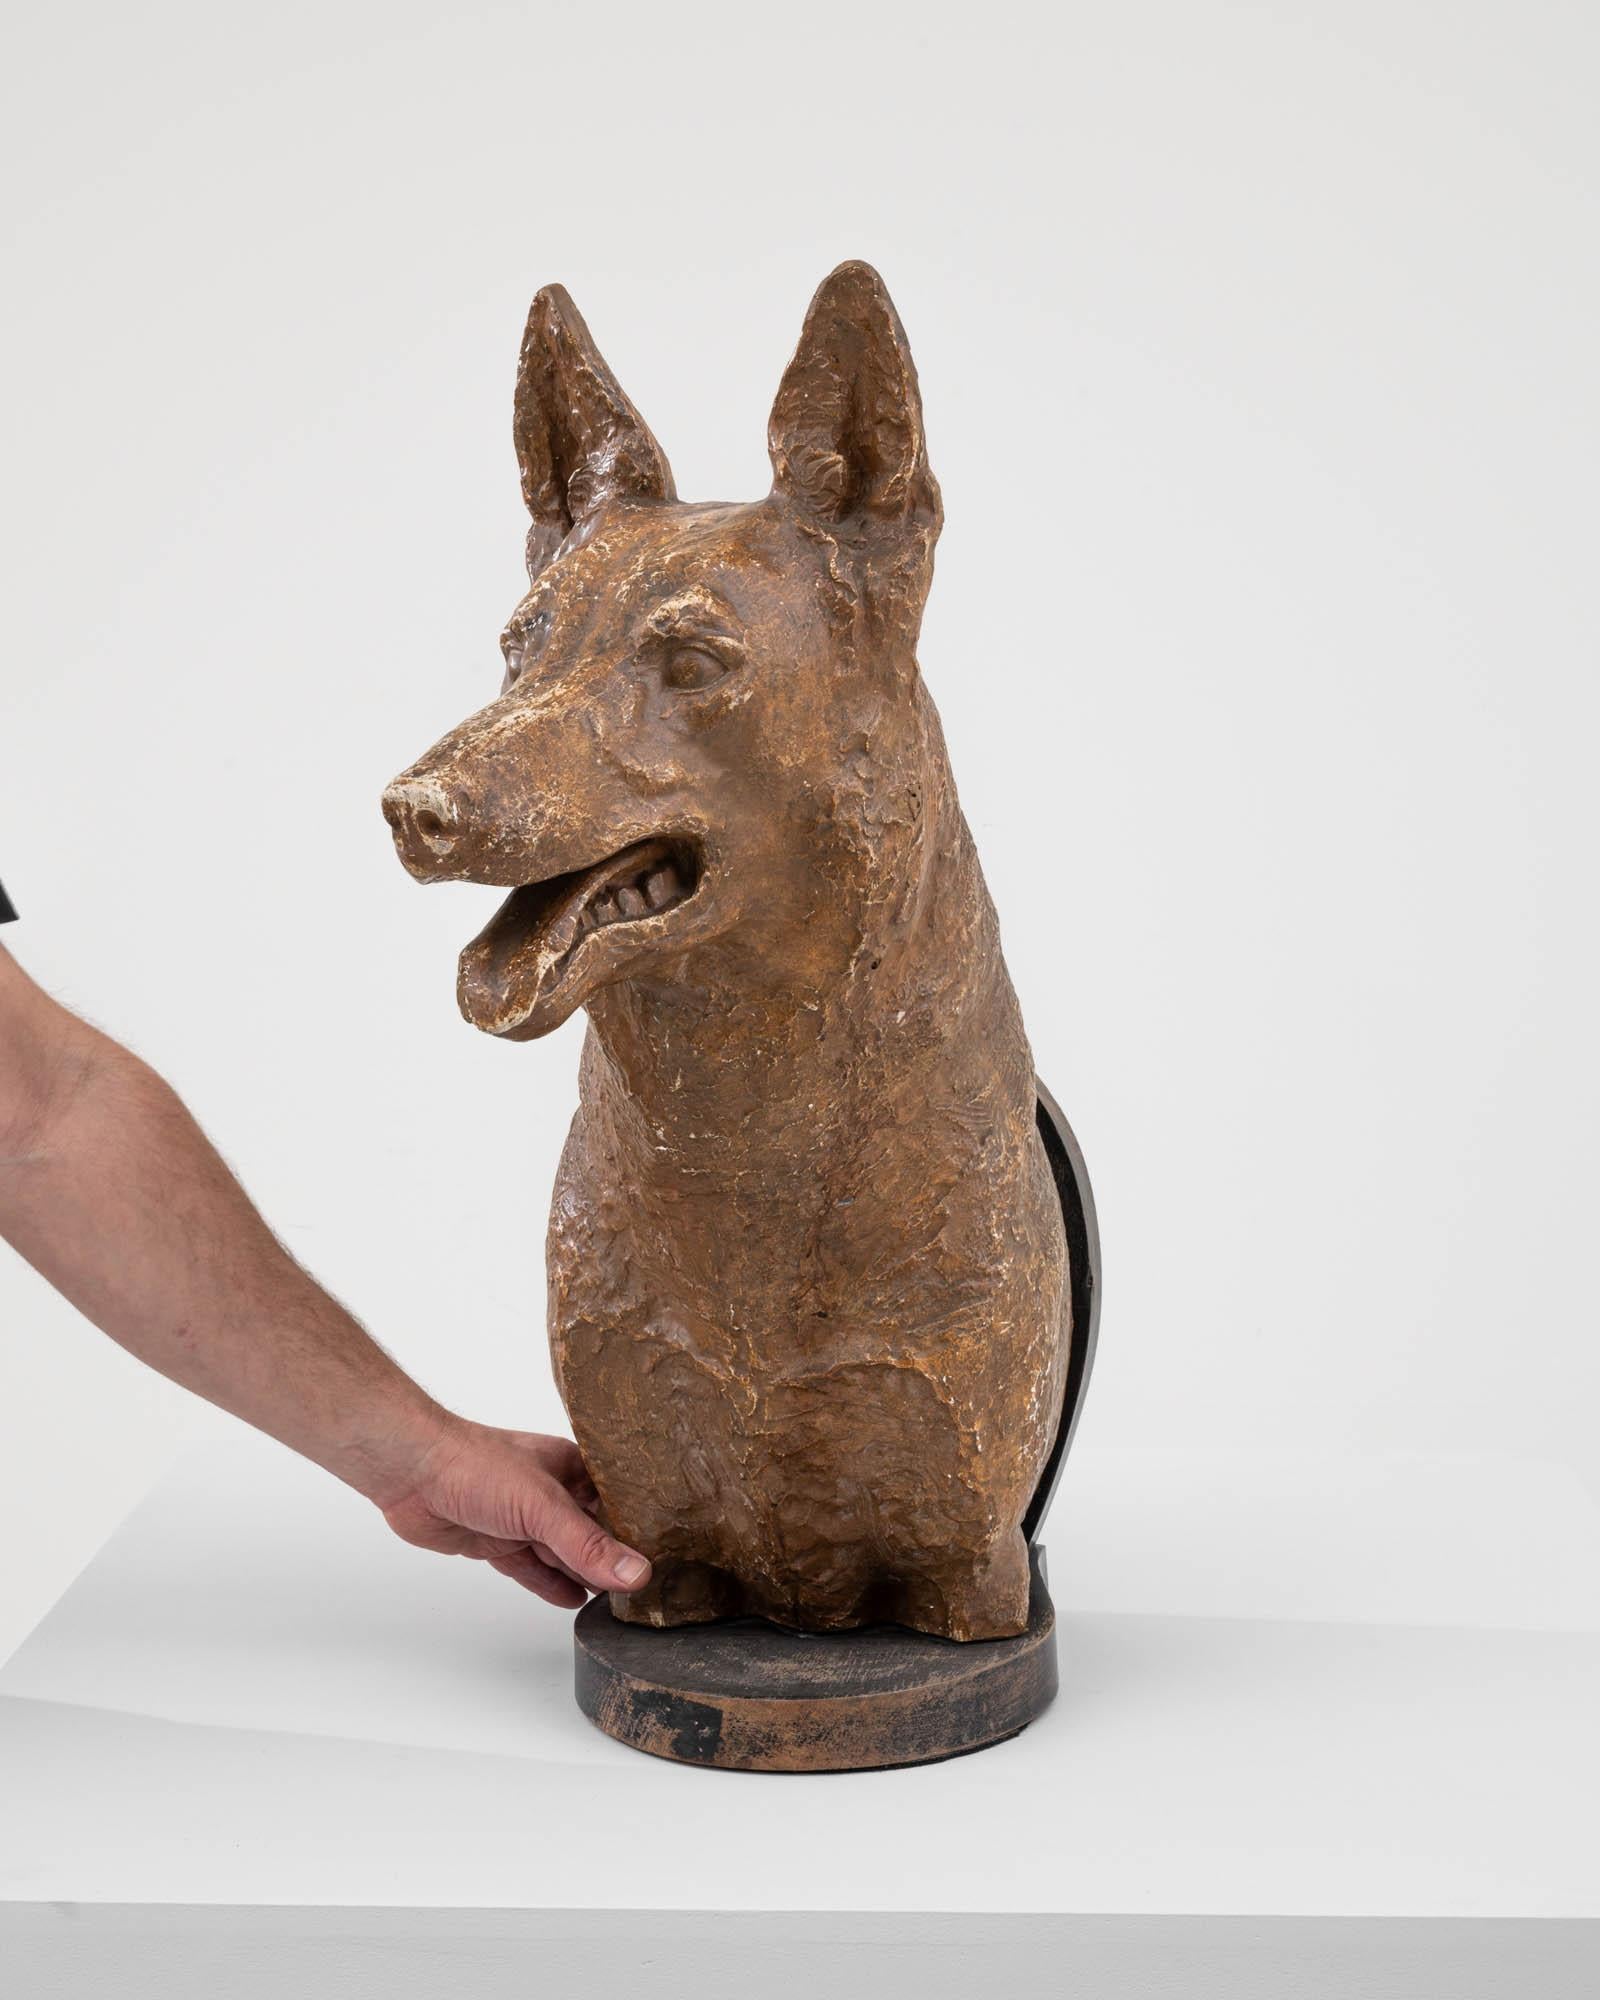 This Early 20th Century Plaster Dog Sculpture exudes a certain nobility and charm. Crafted with attention to detail, the sculpture showcases a faithful canine with a poised and alert expression. The plaster material allows for fine textural details,